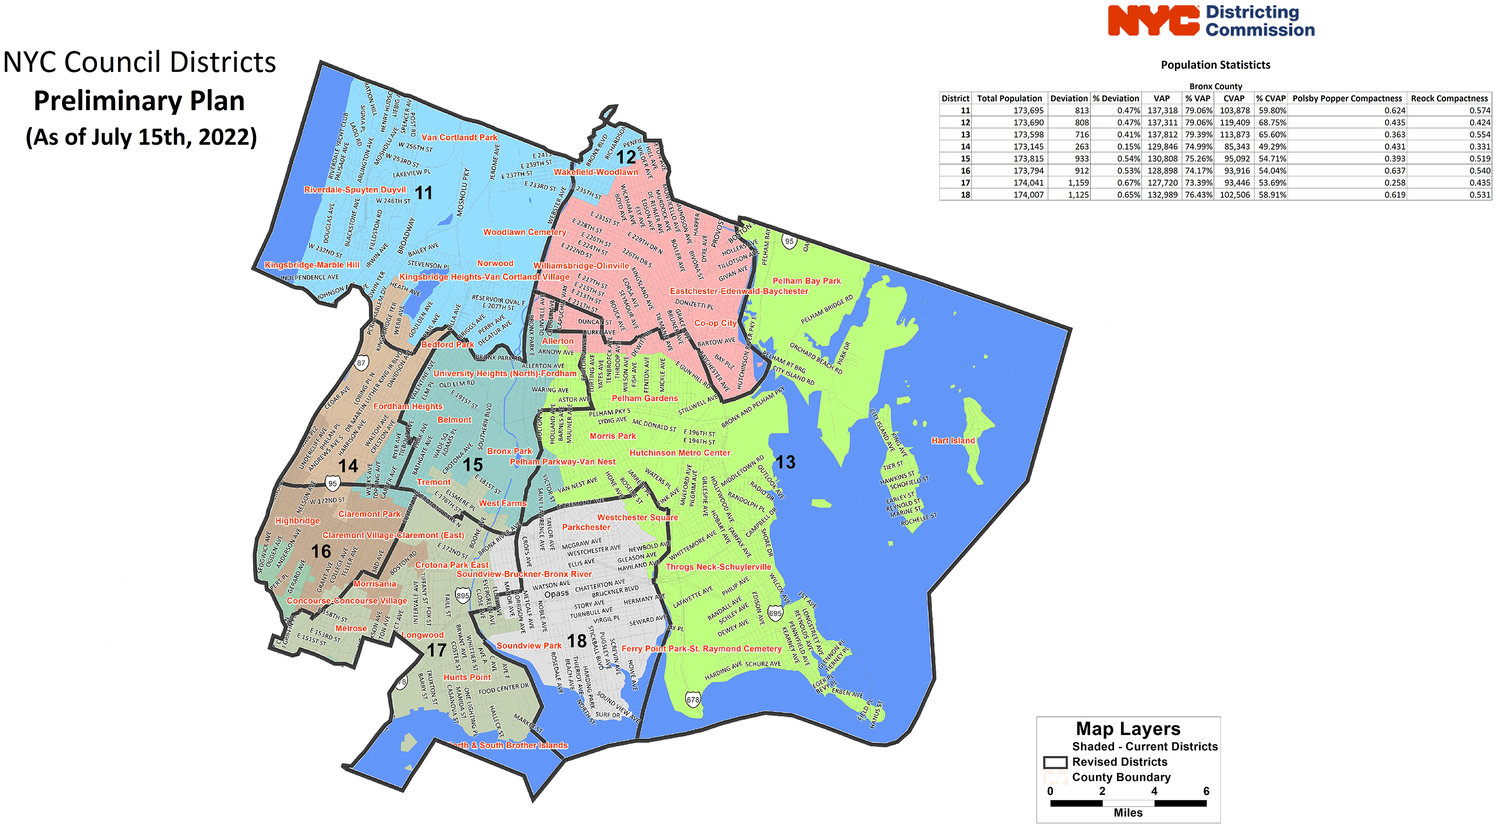 A first draft of the map of the borough’s new City Council districts shows that the commission wants to add more of Kingsbridge Heights to District 11 while cutting out Wakefield to the east.